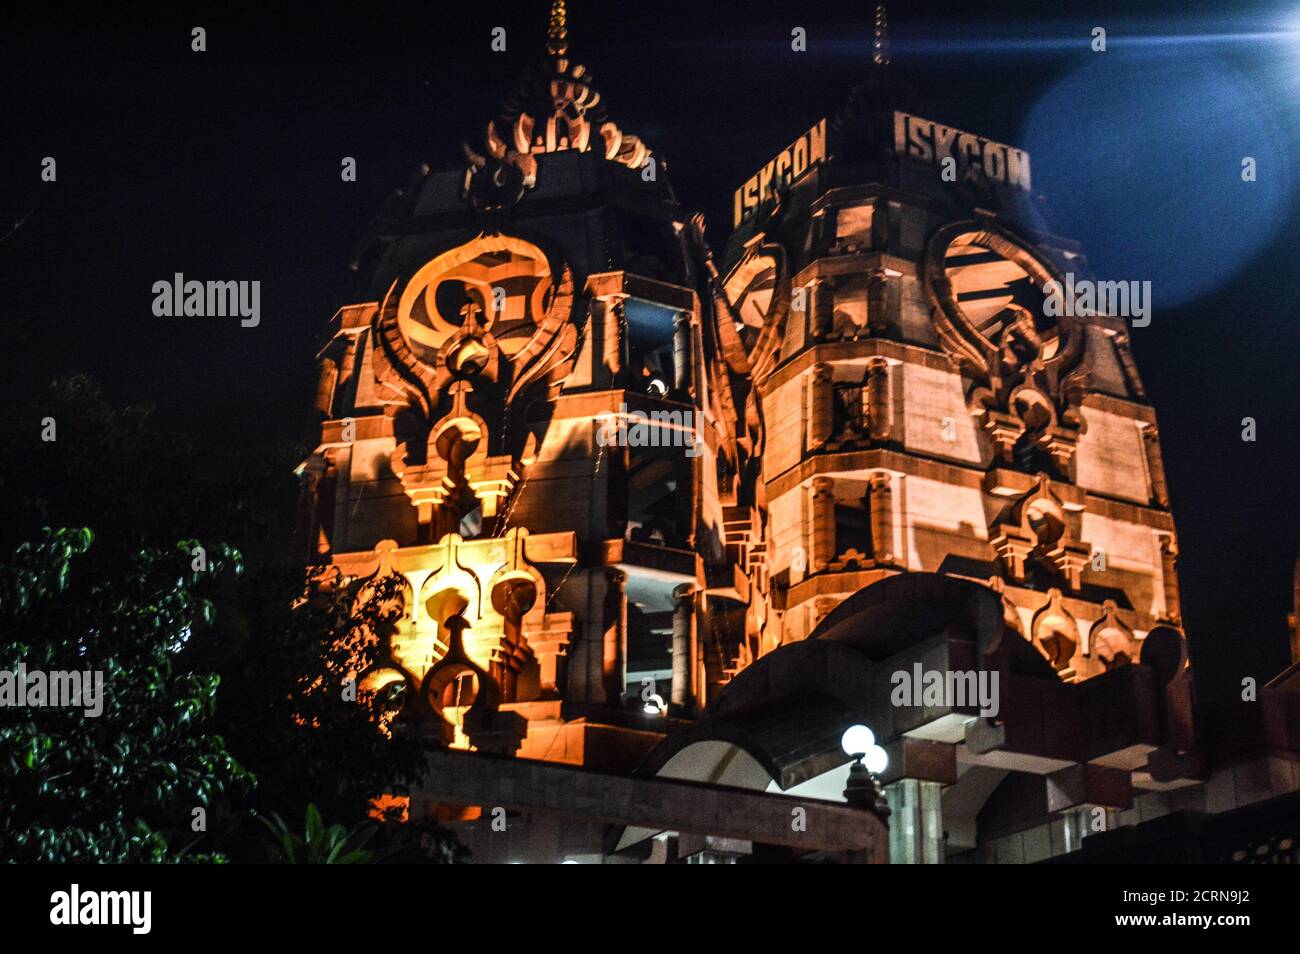 Iskcon temple of new delhi india lit up with light at evening Stock Photo